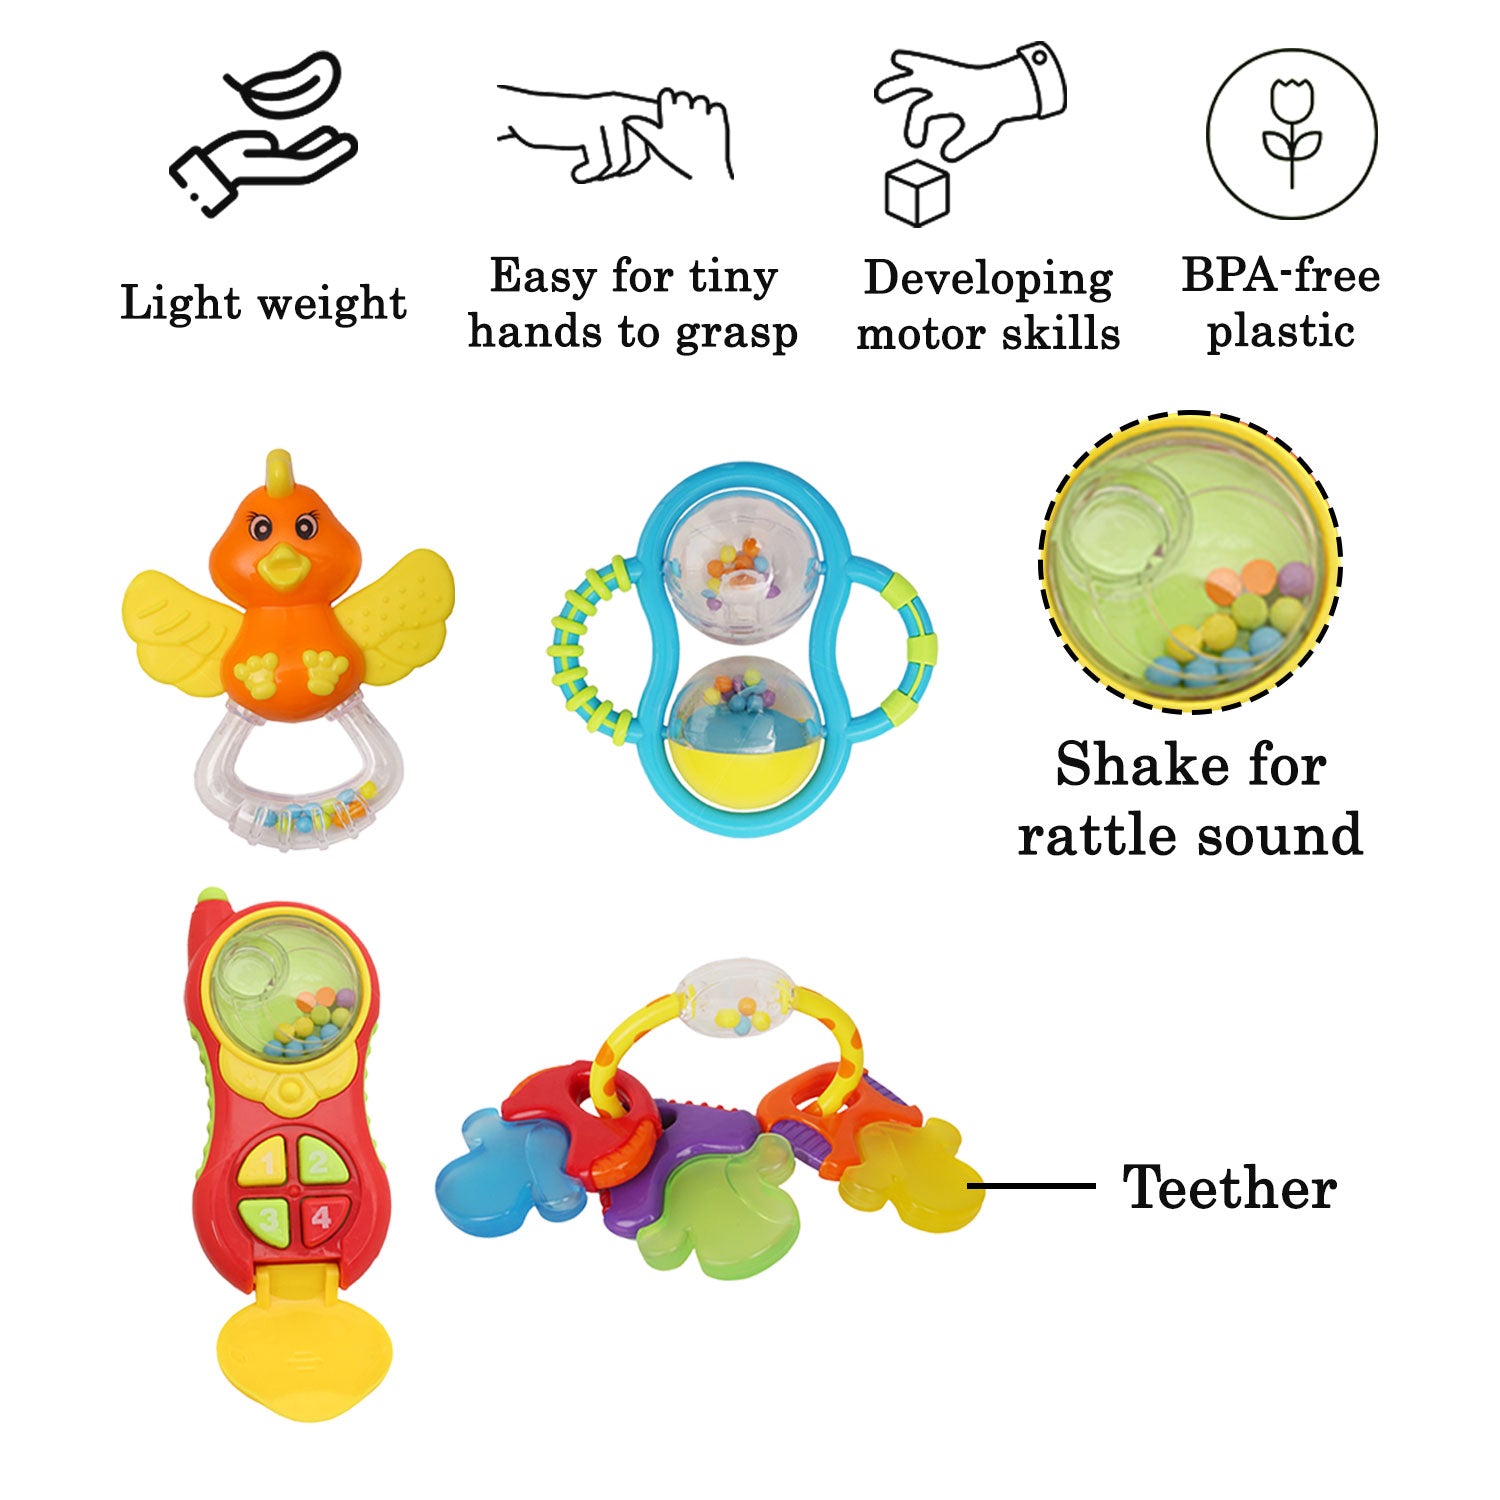 Buy Ratna's Premium Little Chime Rattle Single Piece Big for Infants. Sweet  Musical Sound Makes Infants Happy While Playing with This Rattle. Online at  Low Prices in India 